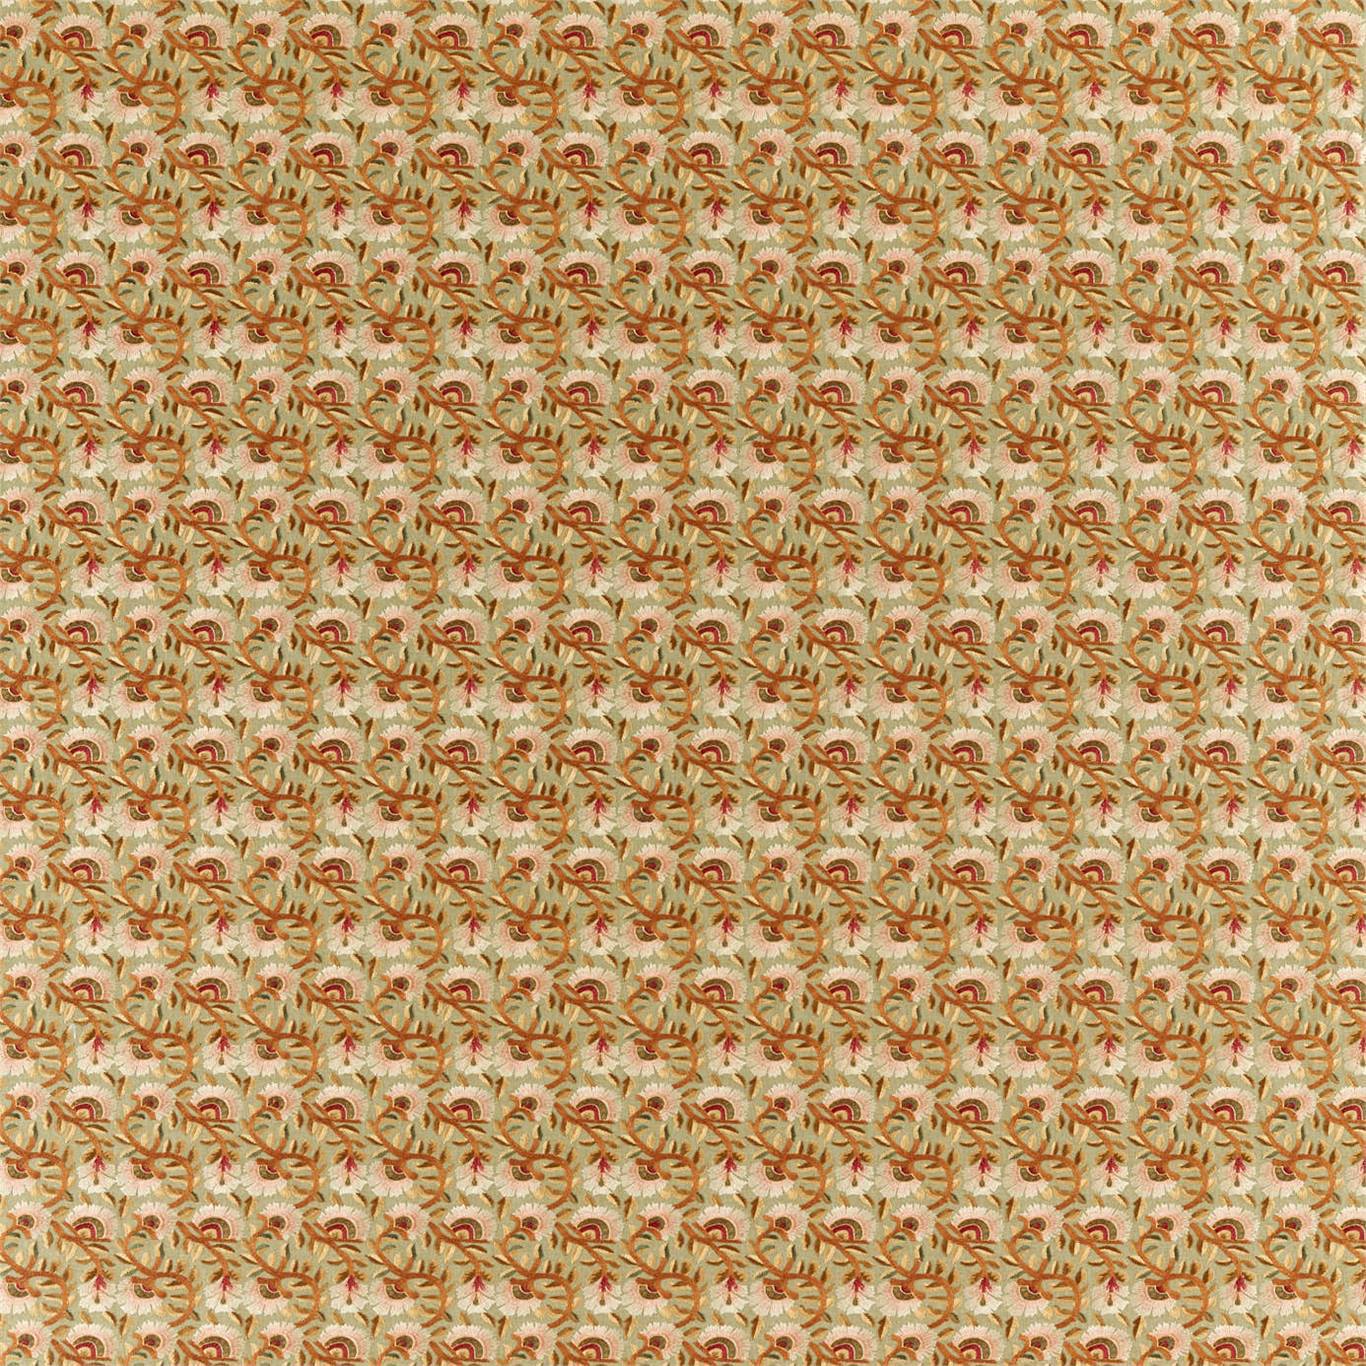 Wardle Embroidery Olive / Brick Fabric by MOR